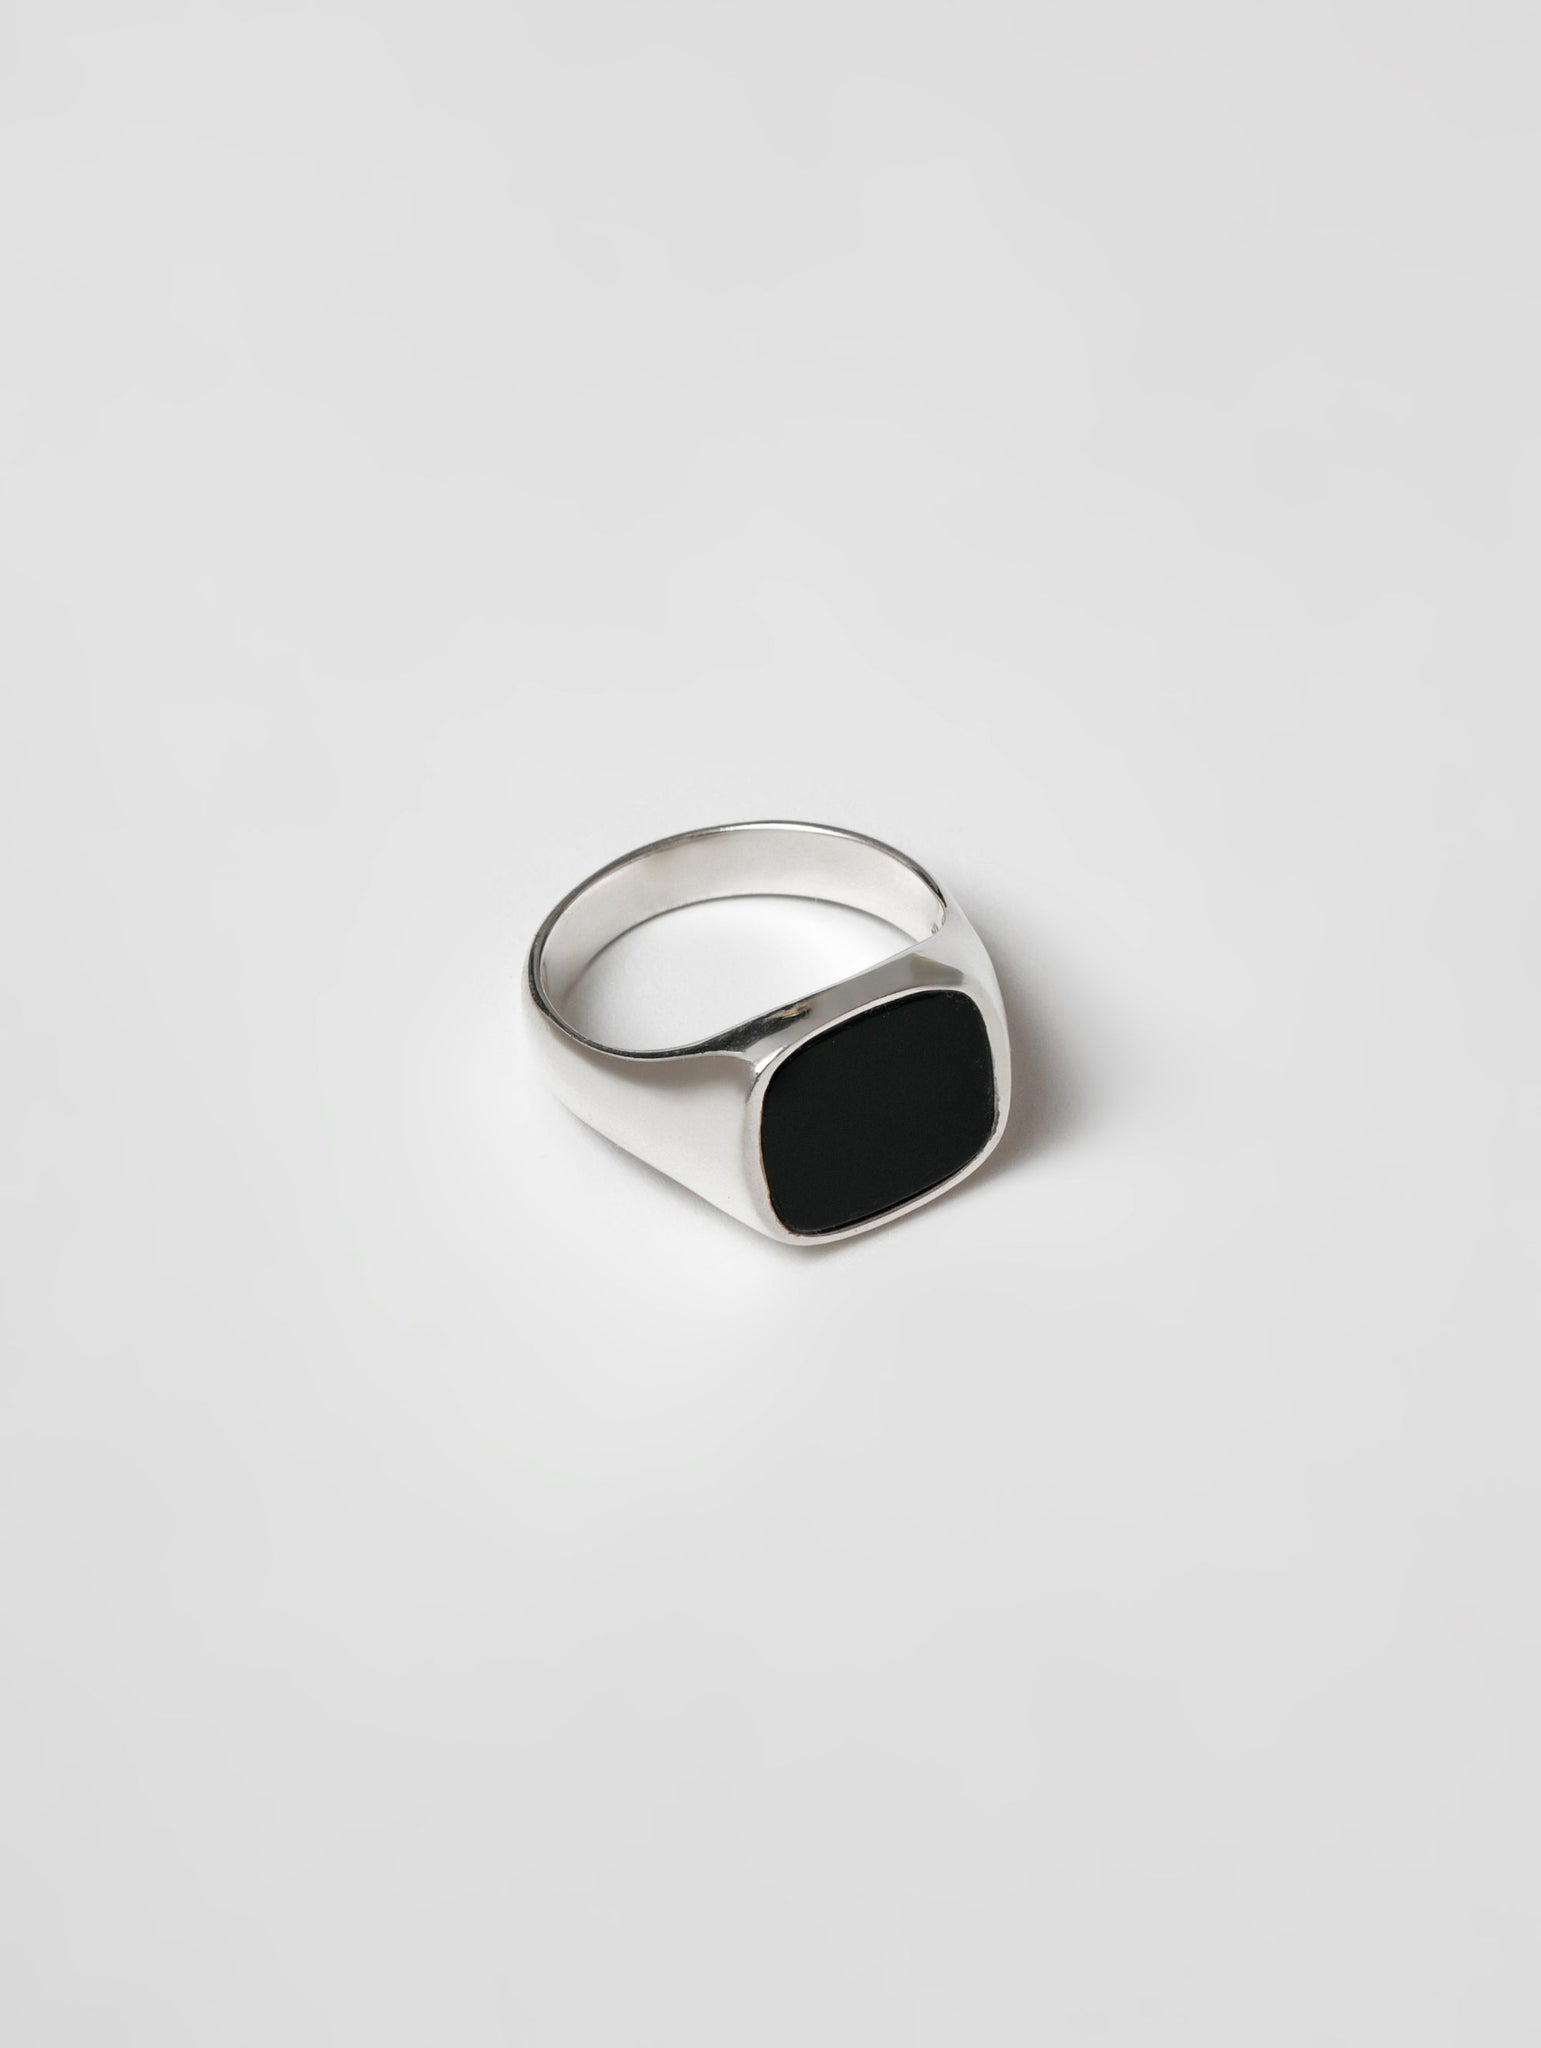 Jules Ring in Onyx + Sterling Silver